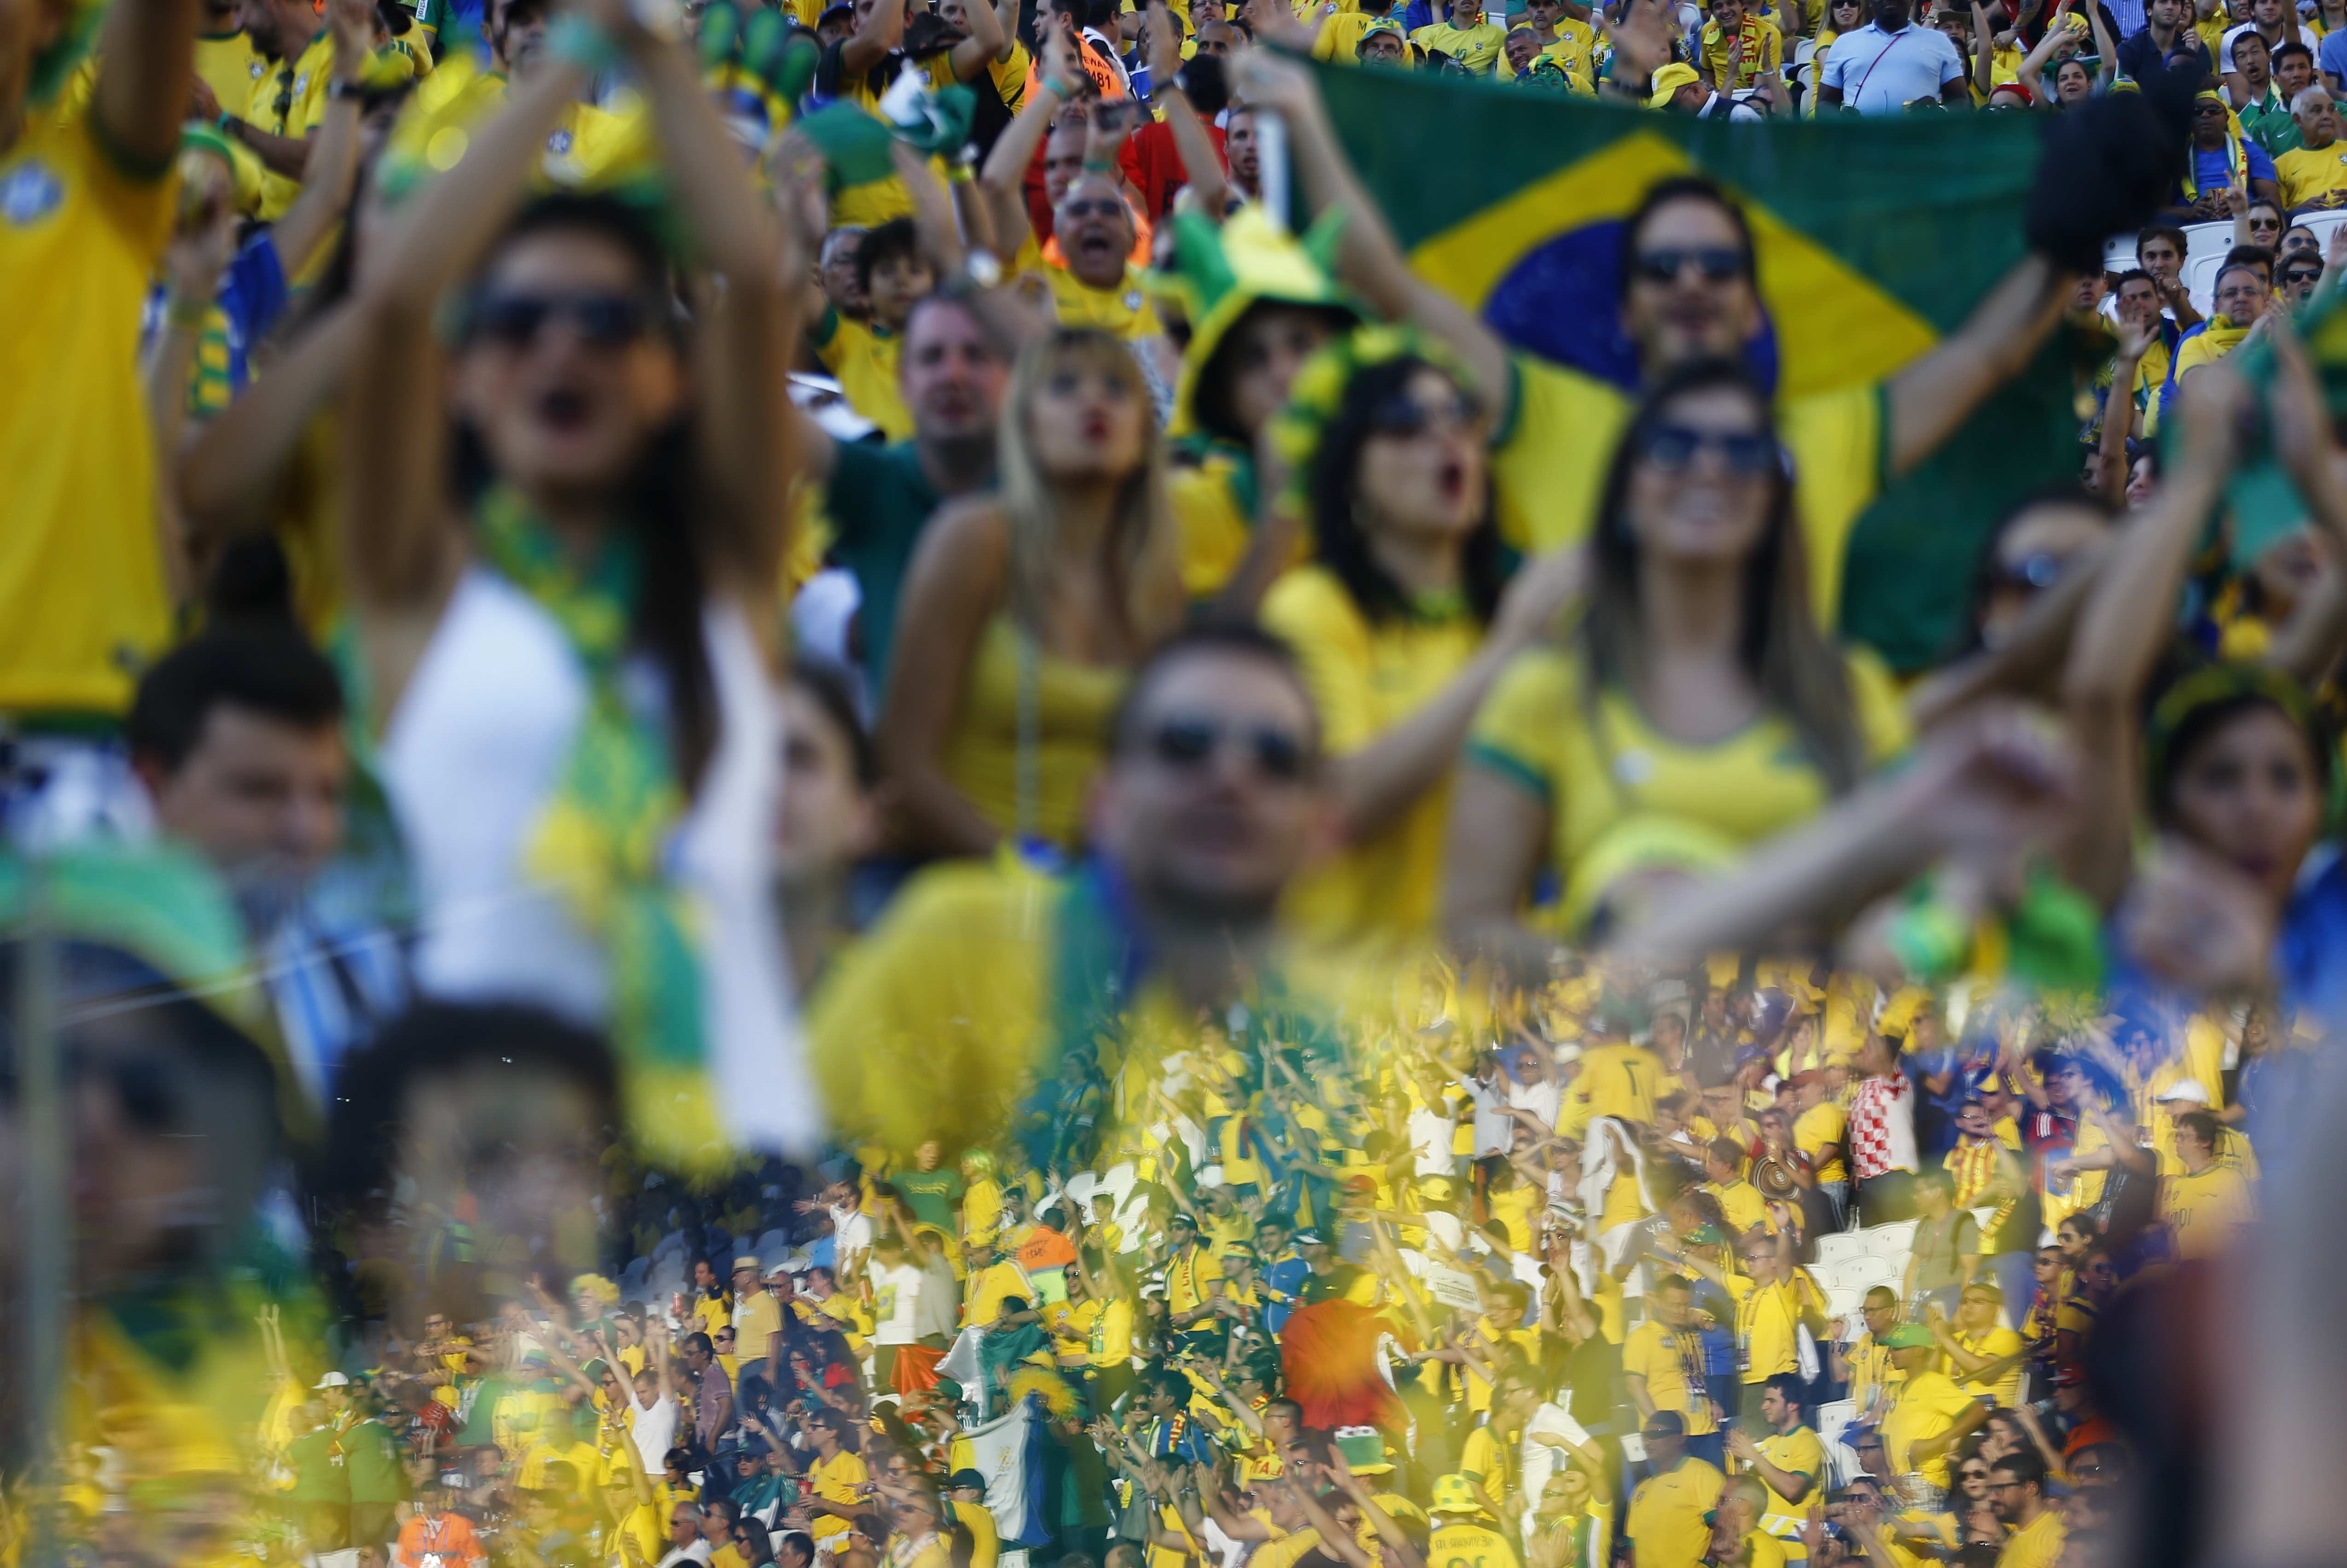 A reflection of cheering fans is seen before the 2014 World Cup opening match between Brazil and Croatia at the Corinthians arena in Sao Paulo on June 12, 2014.